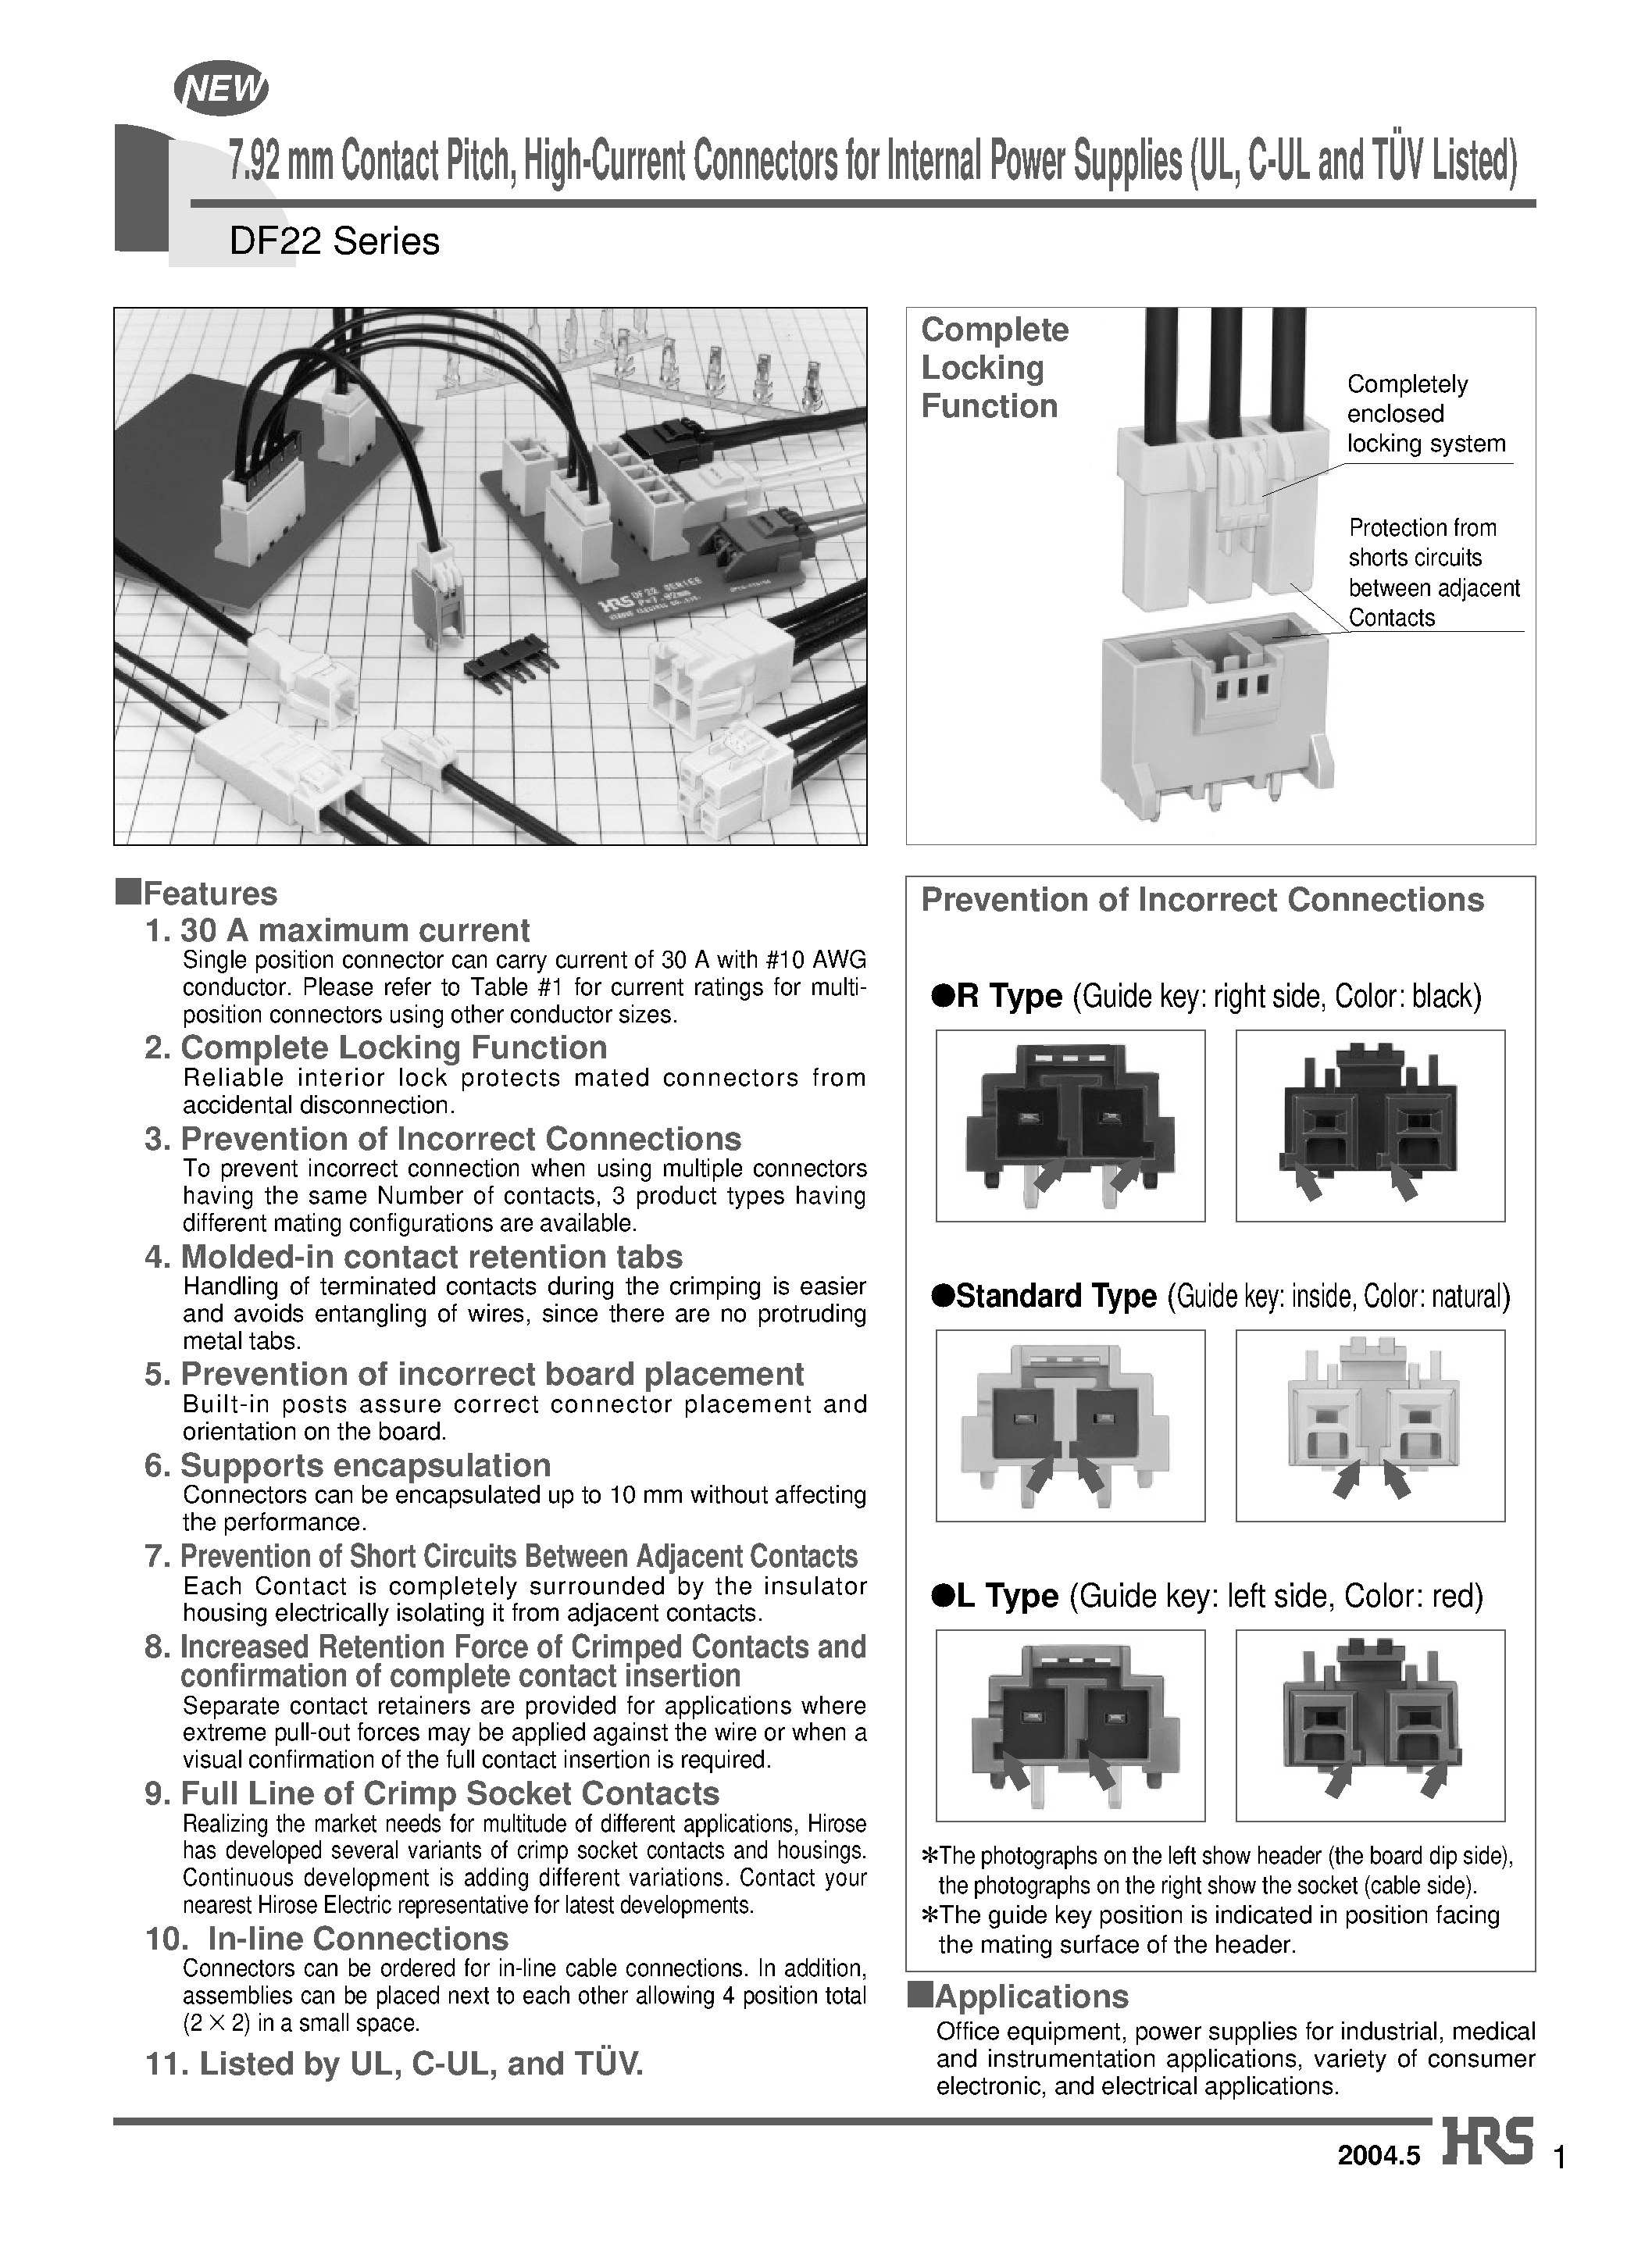 Даташит DF22AL-3S-7.92C - 7.92 mm Contact Pitch/ High-Current Connectors for Internal Power Supplies (UL/ C-UL and TUV Listed) страница 1